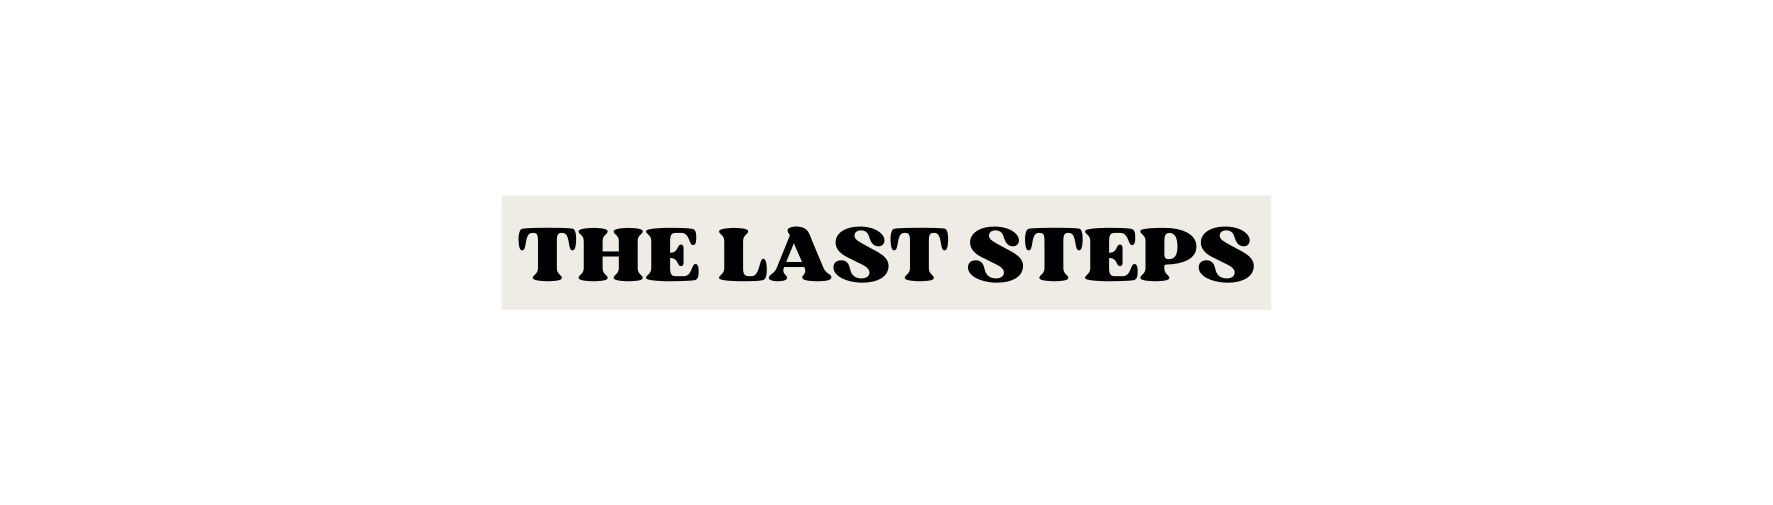 the last steps